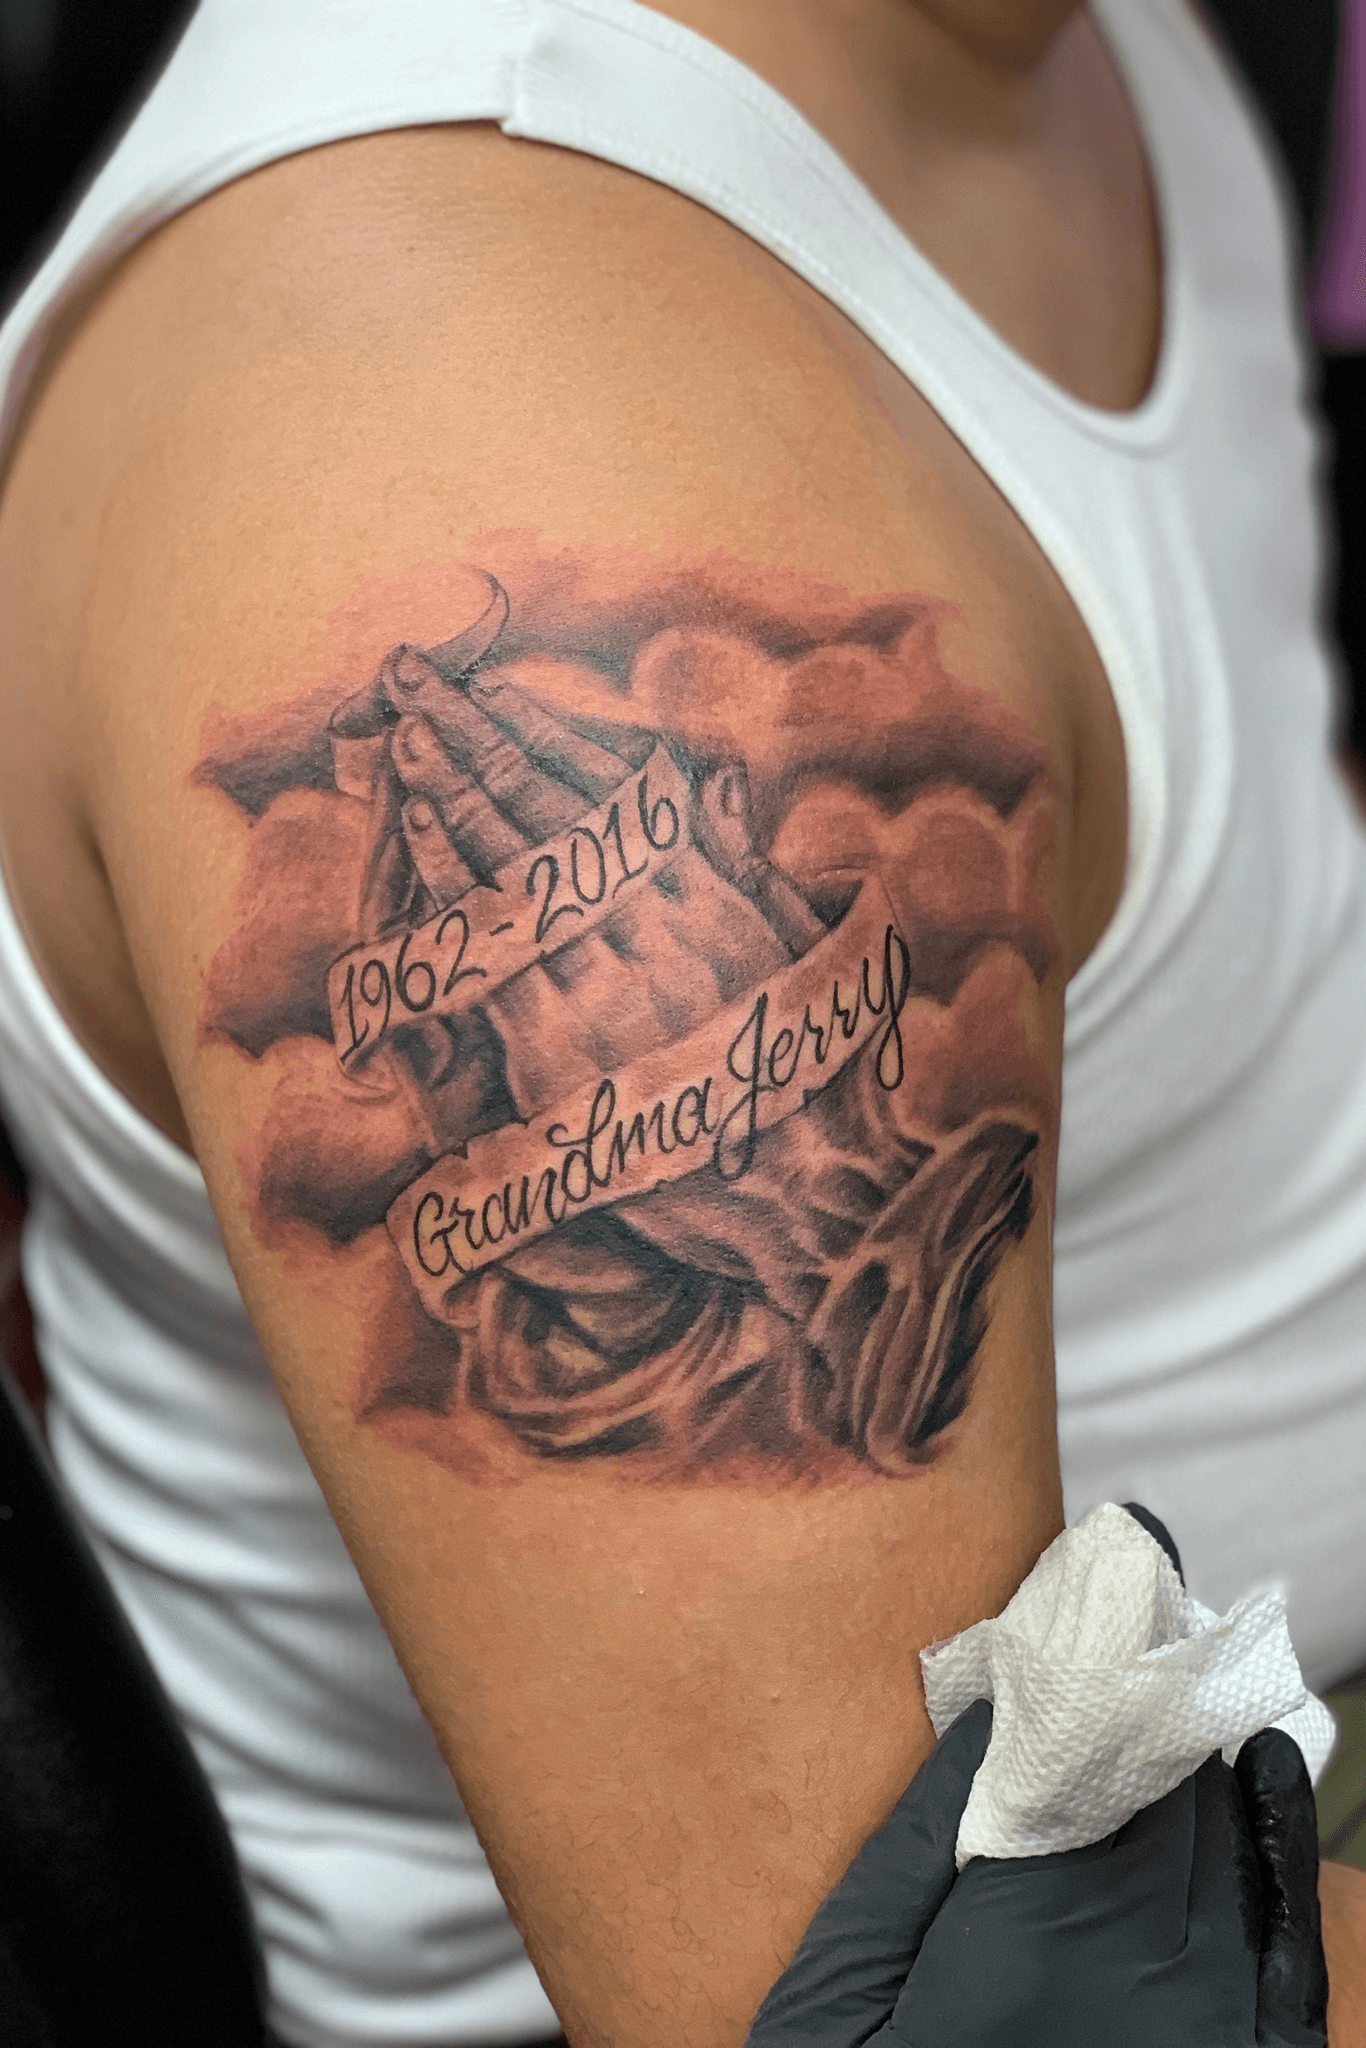 PrayingHands tattoo meanings  popular questions